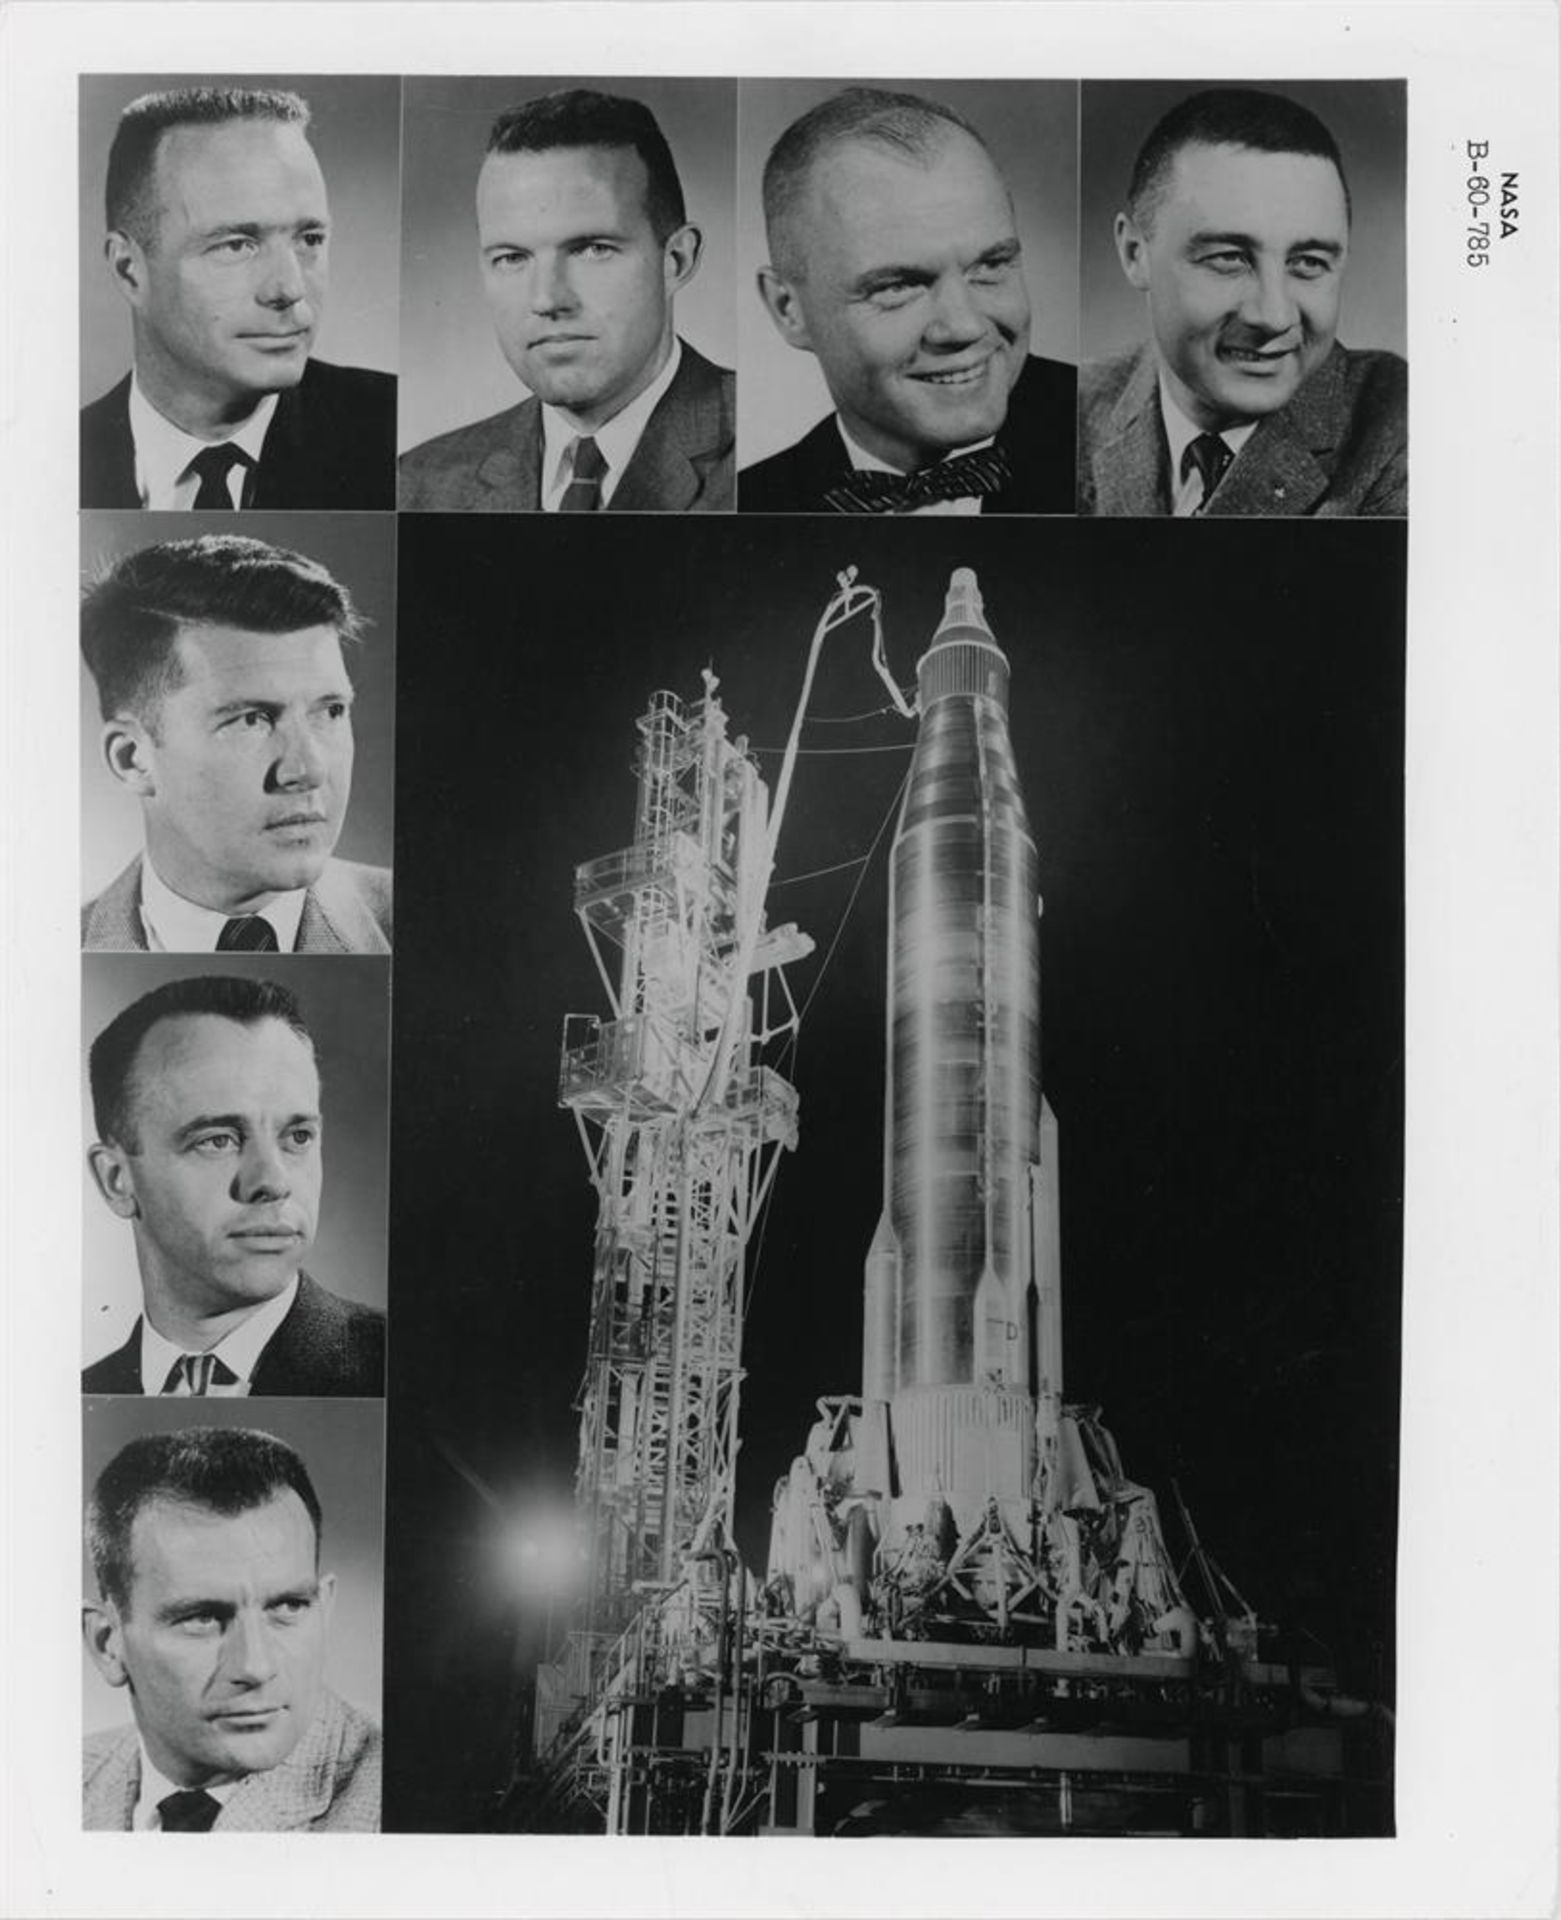 The Mercury Seven group with test pilot aircraft and Big Joe rocket (2 views), 1960- 20 January 1961 - Image 4 of 5